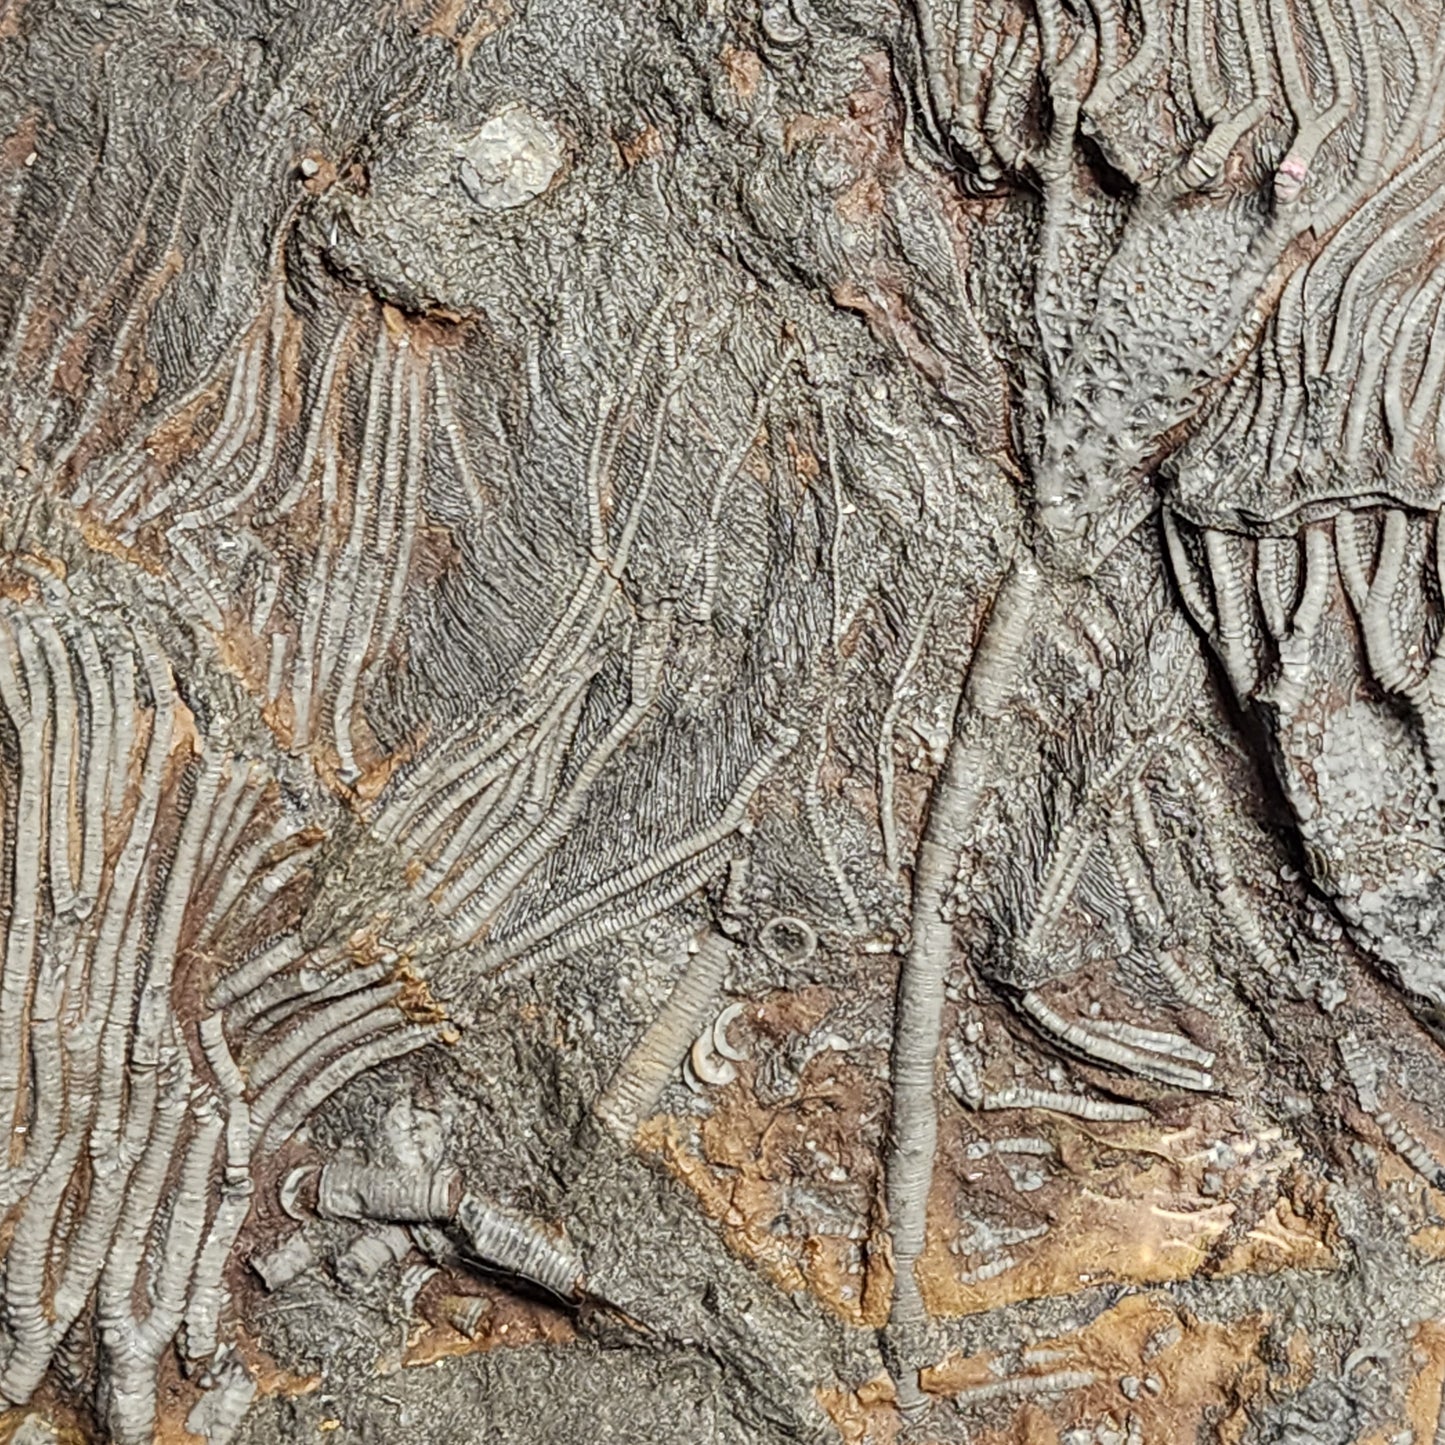 Authentic Crinoid Plate from Morocco